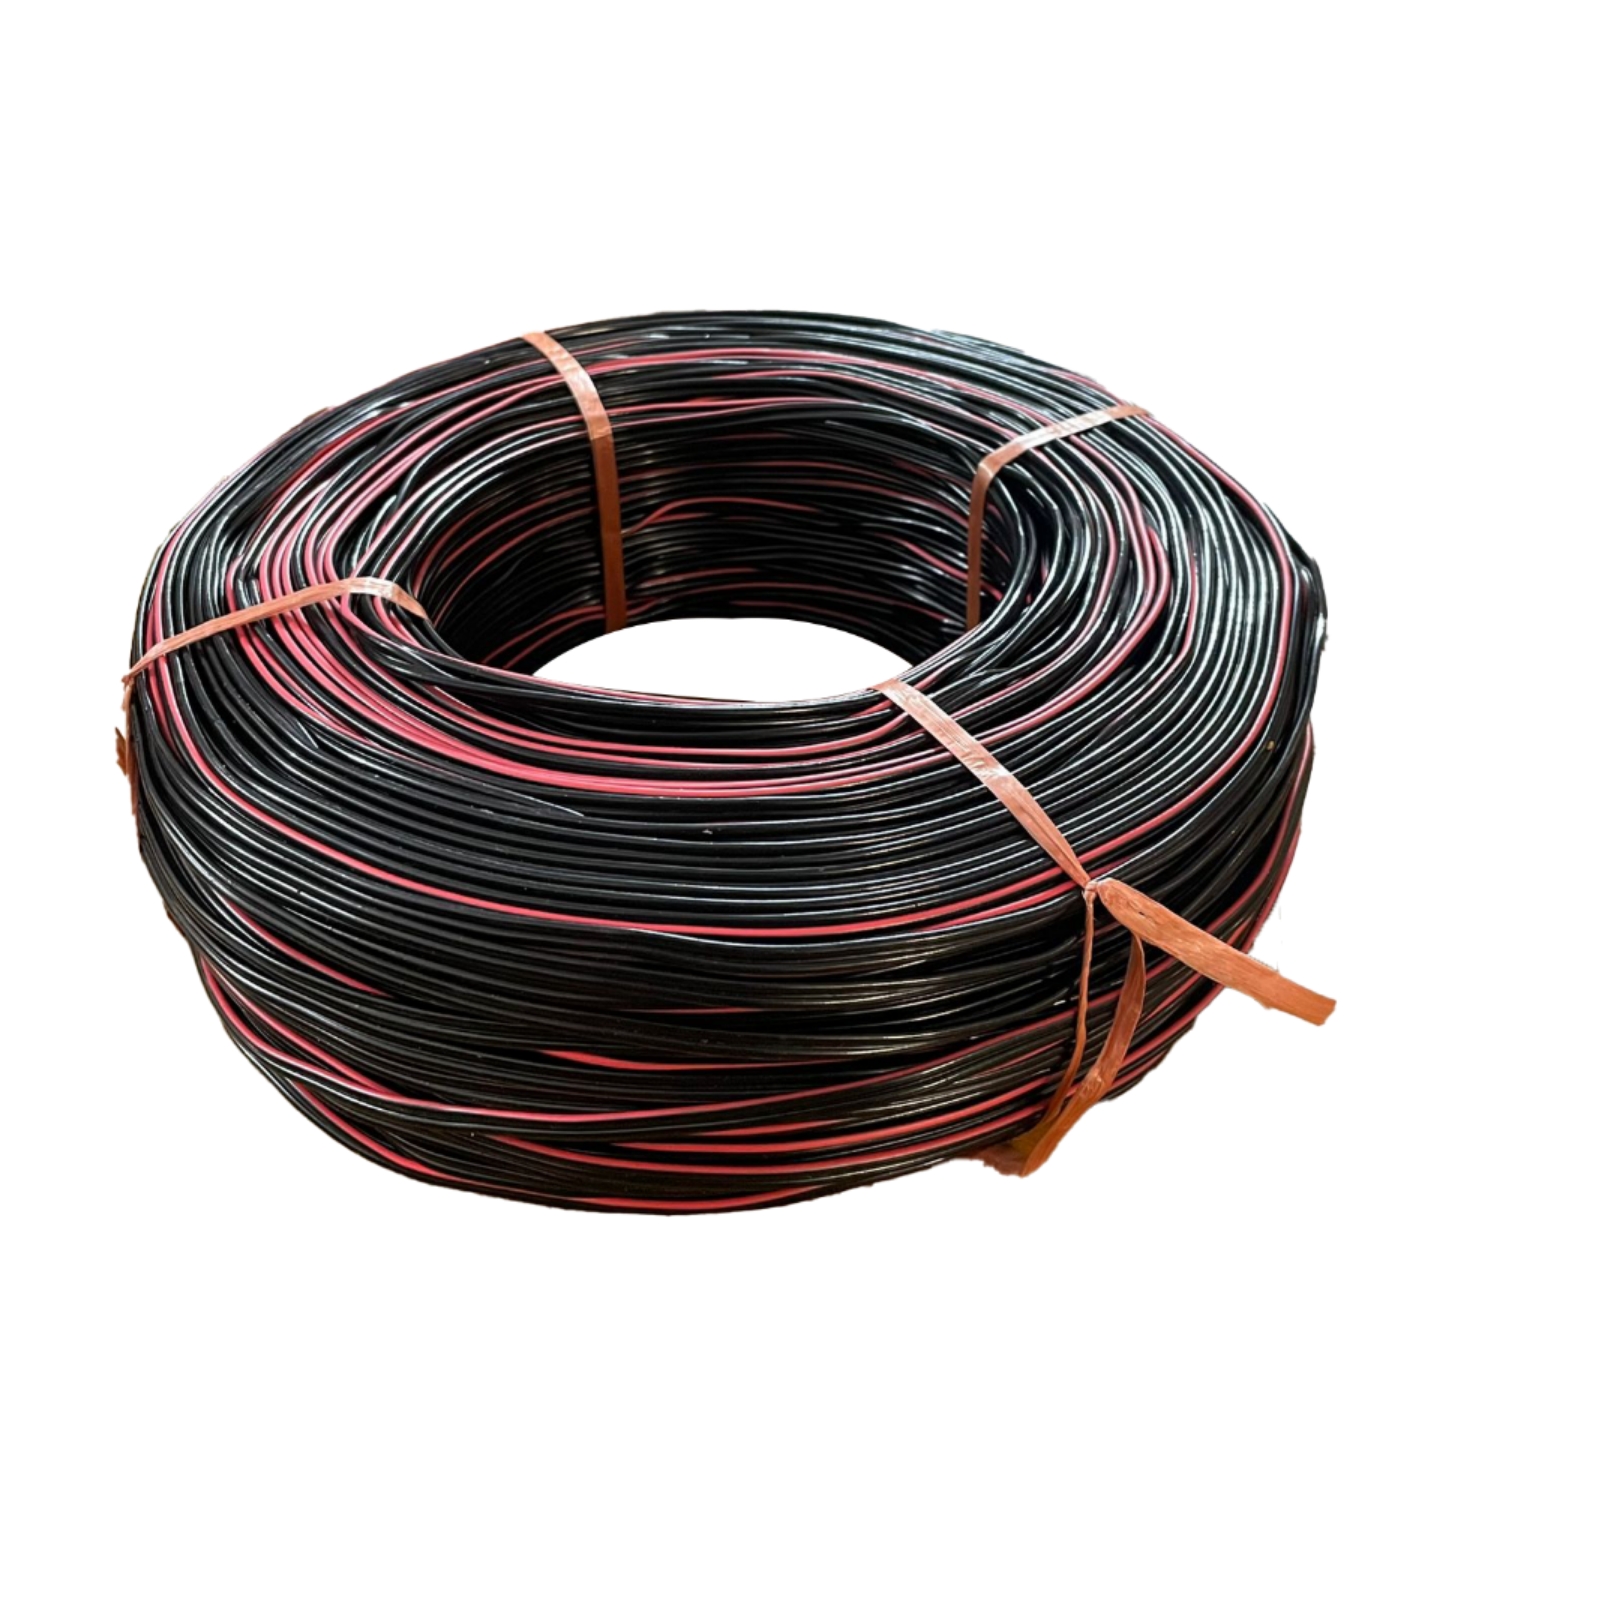 DC WIRE ROLL(BLACK & RED)